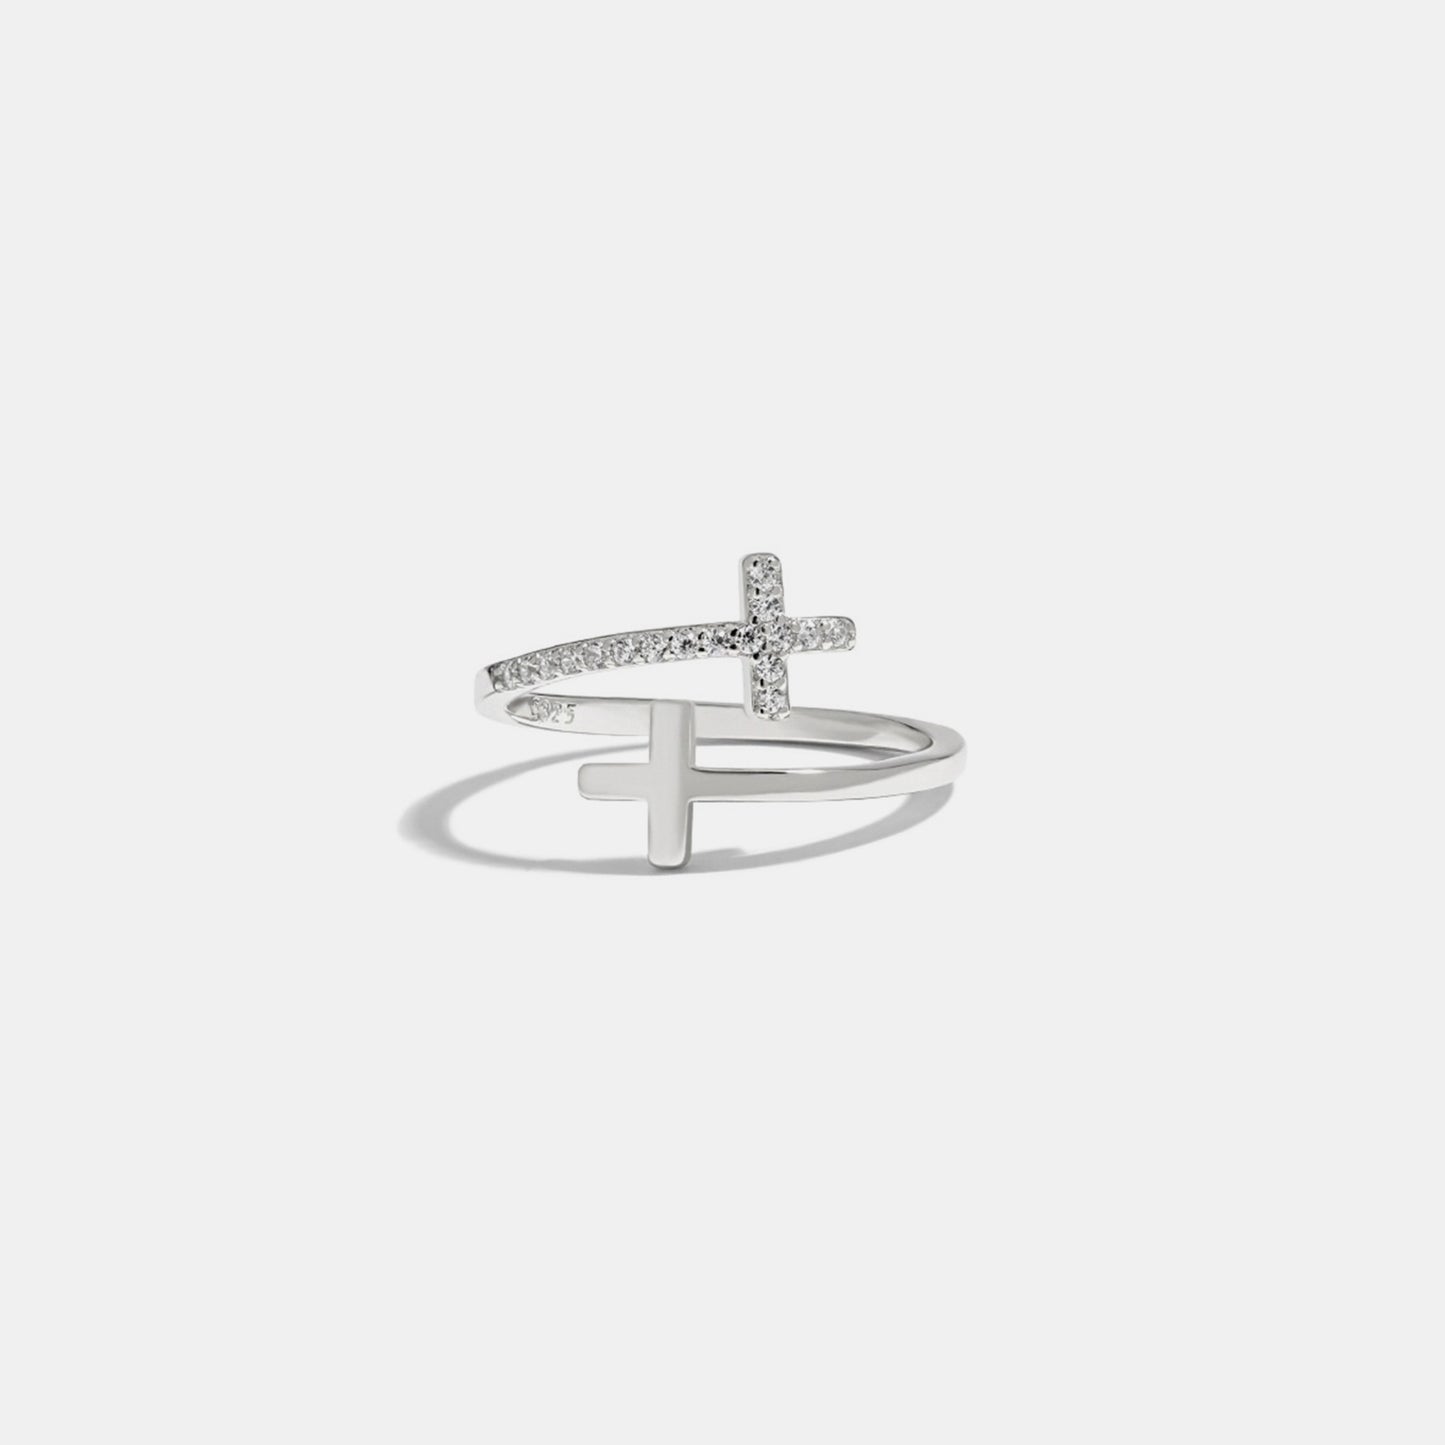 Classy 925 Sterling Silver Double Cross Ring